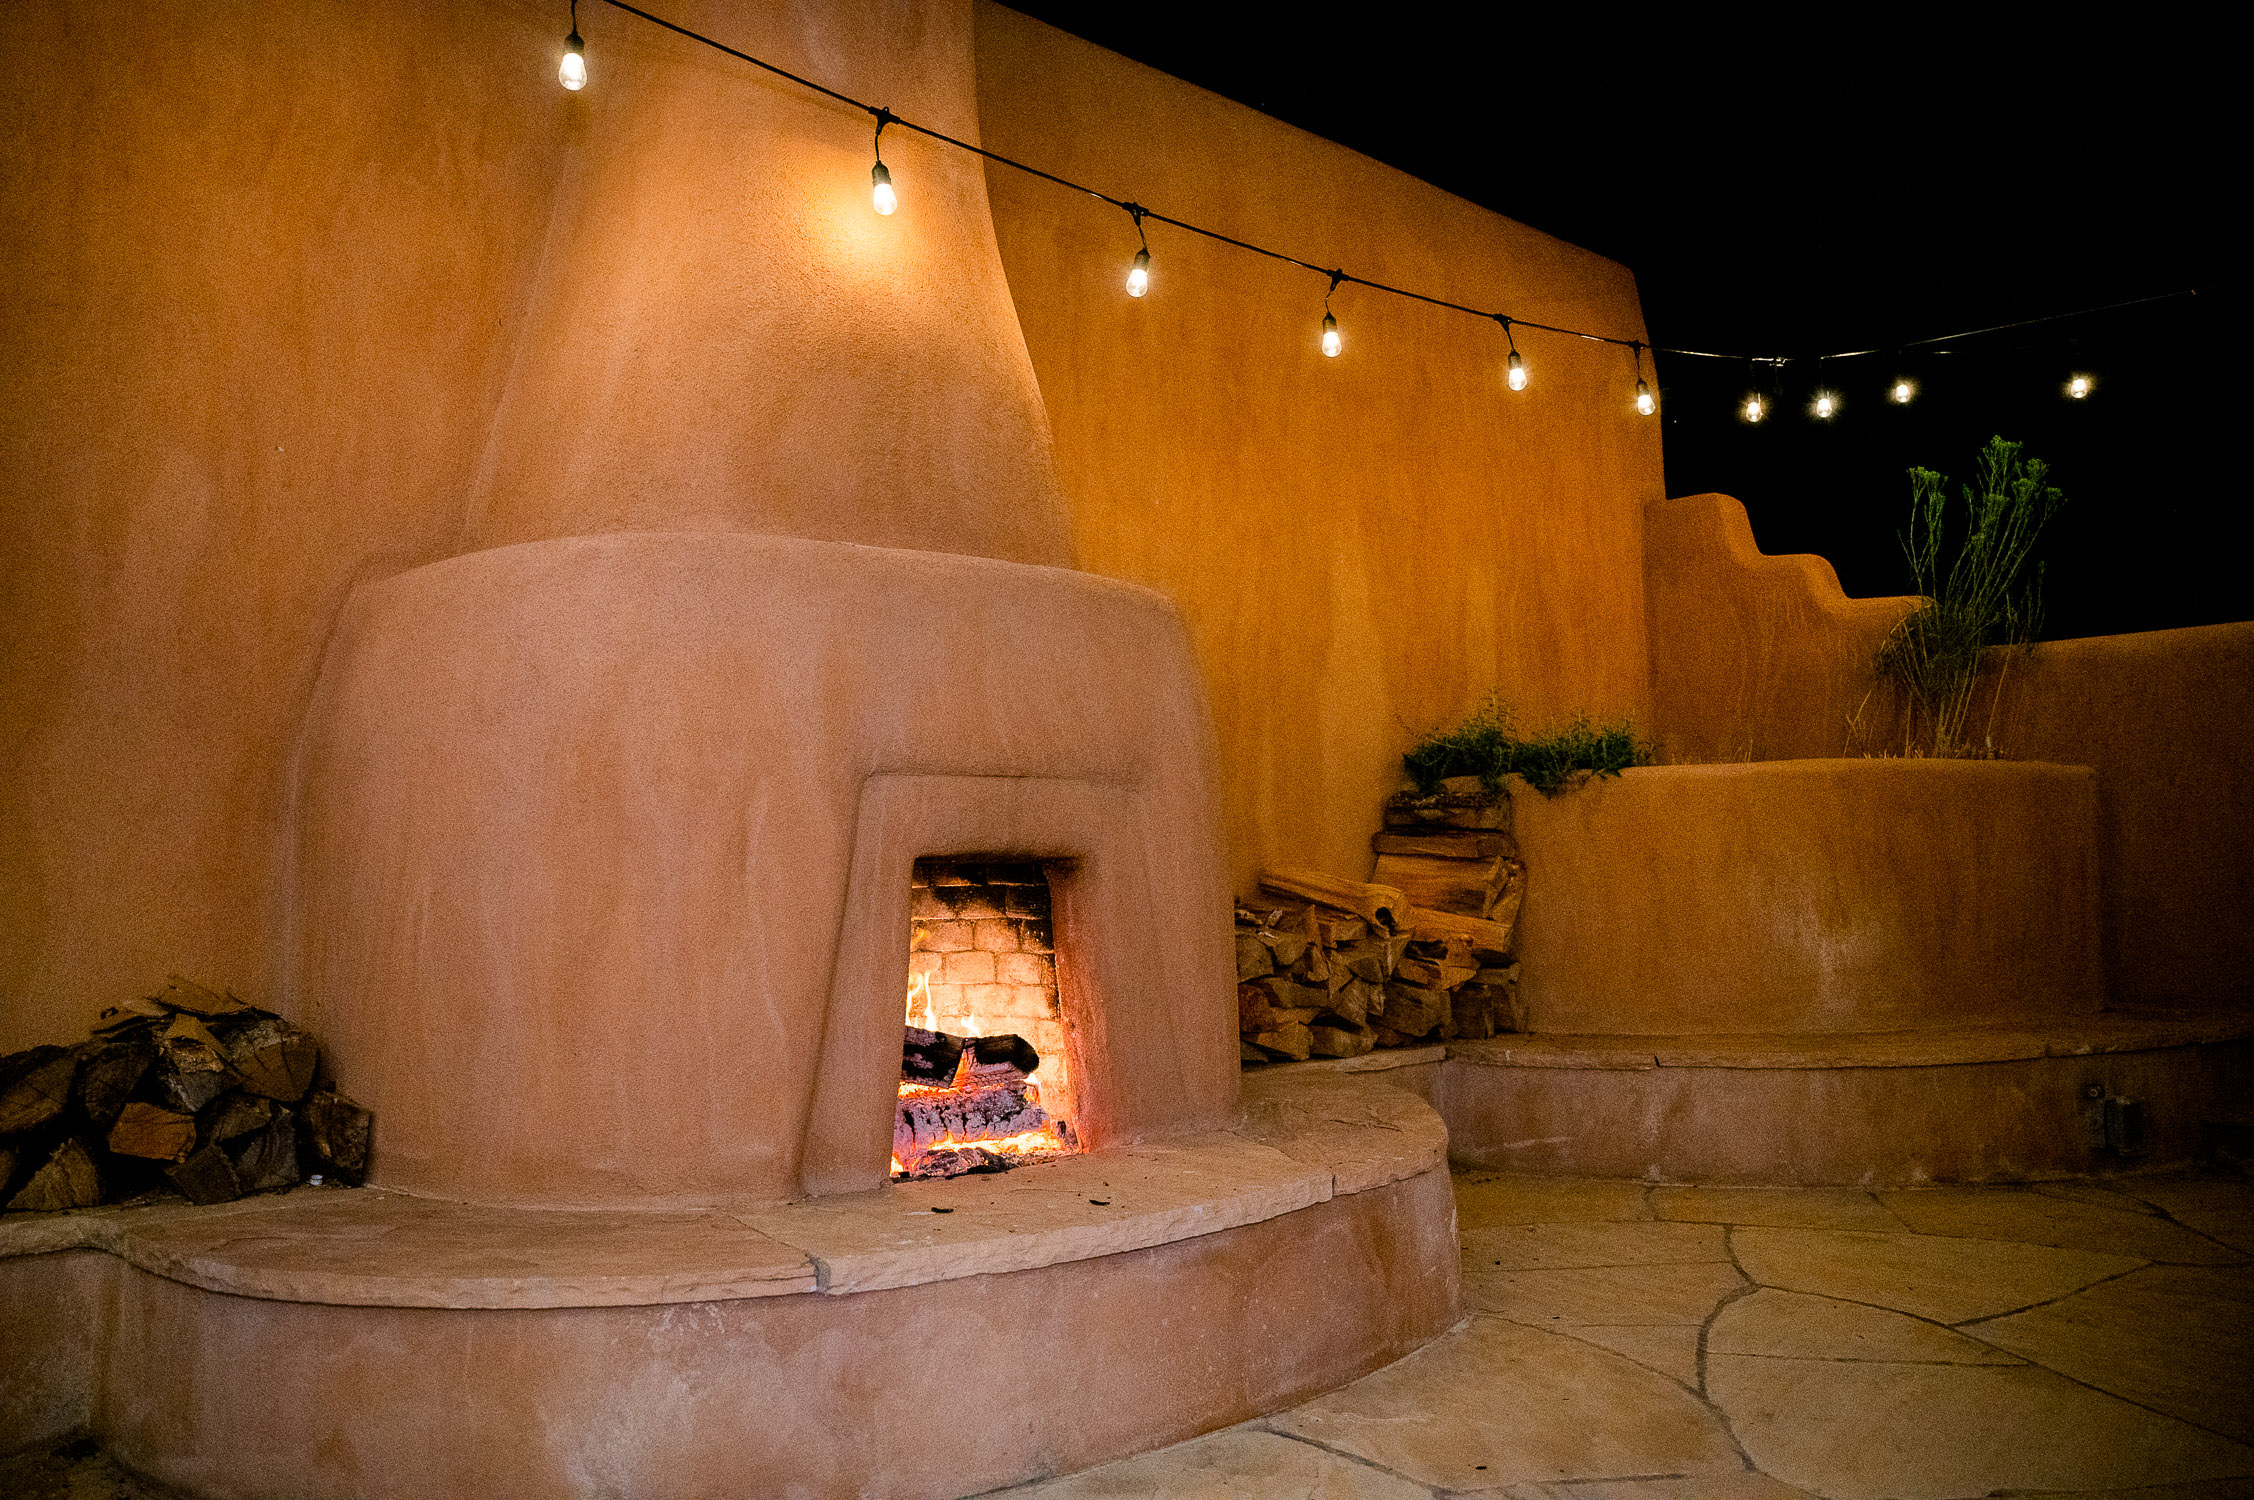 Adobe fireplace with fire.